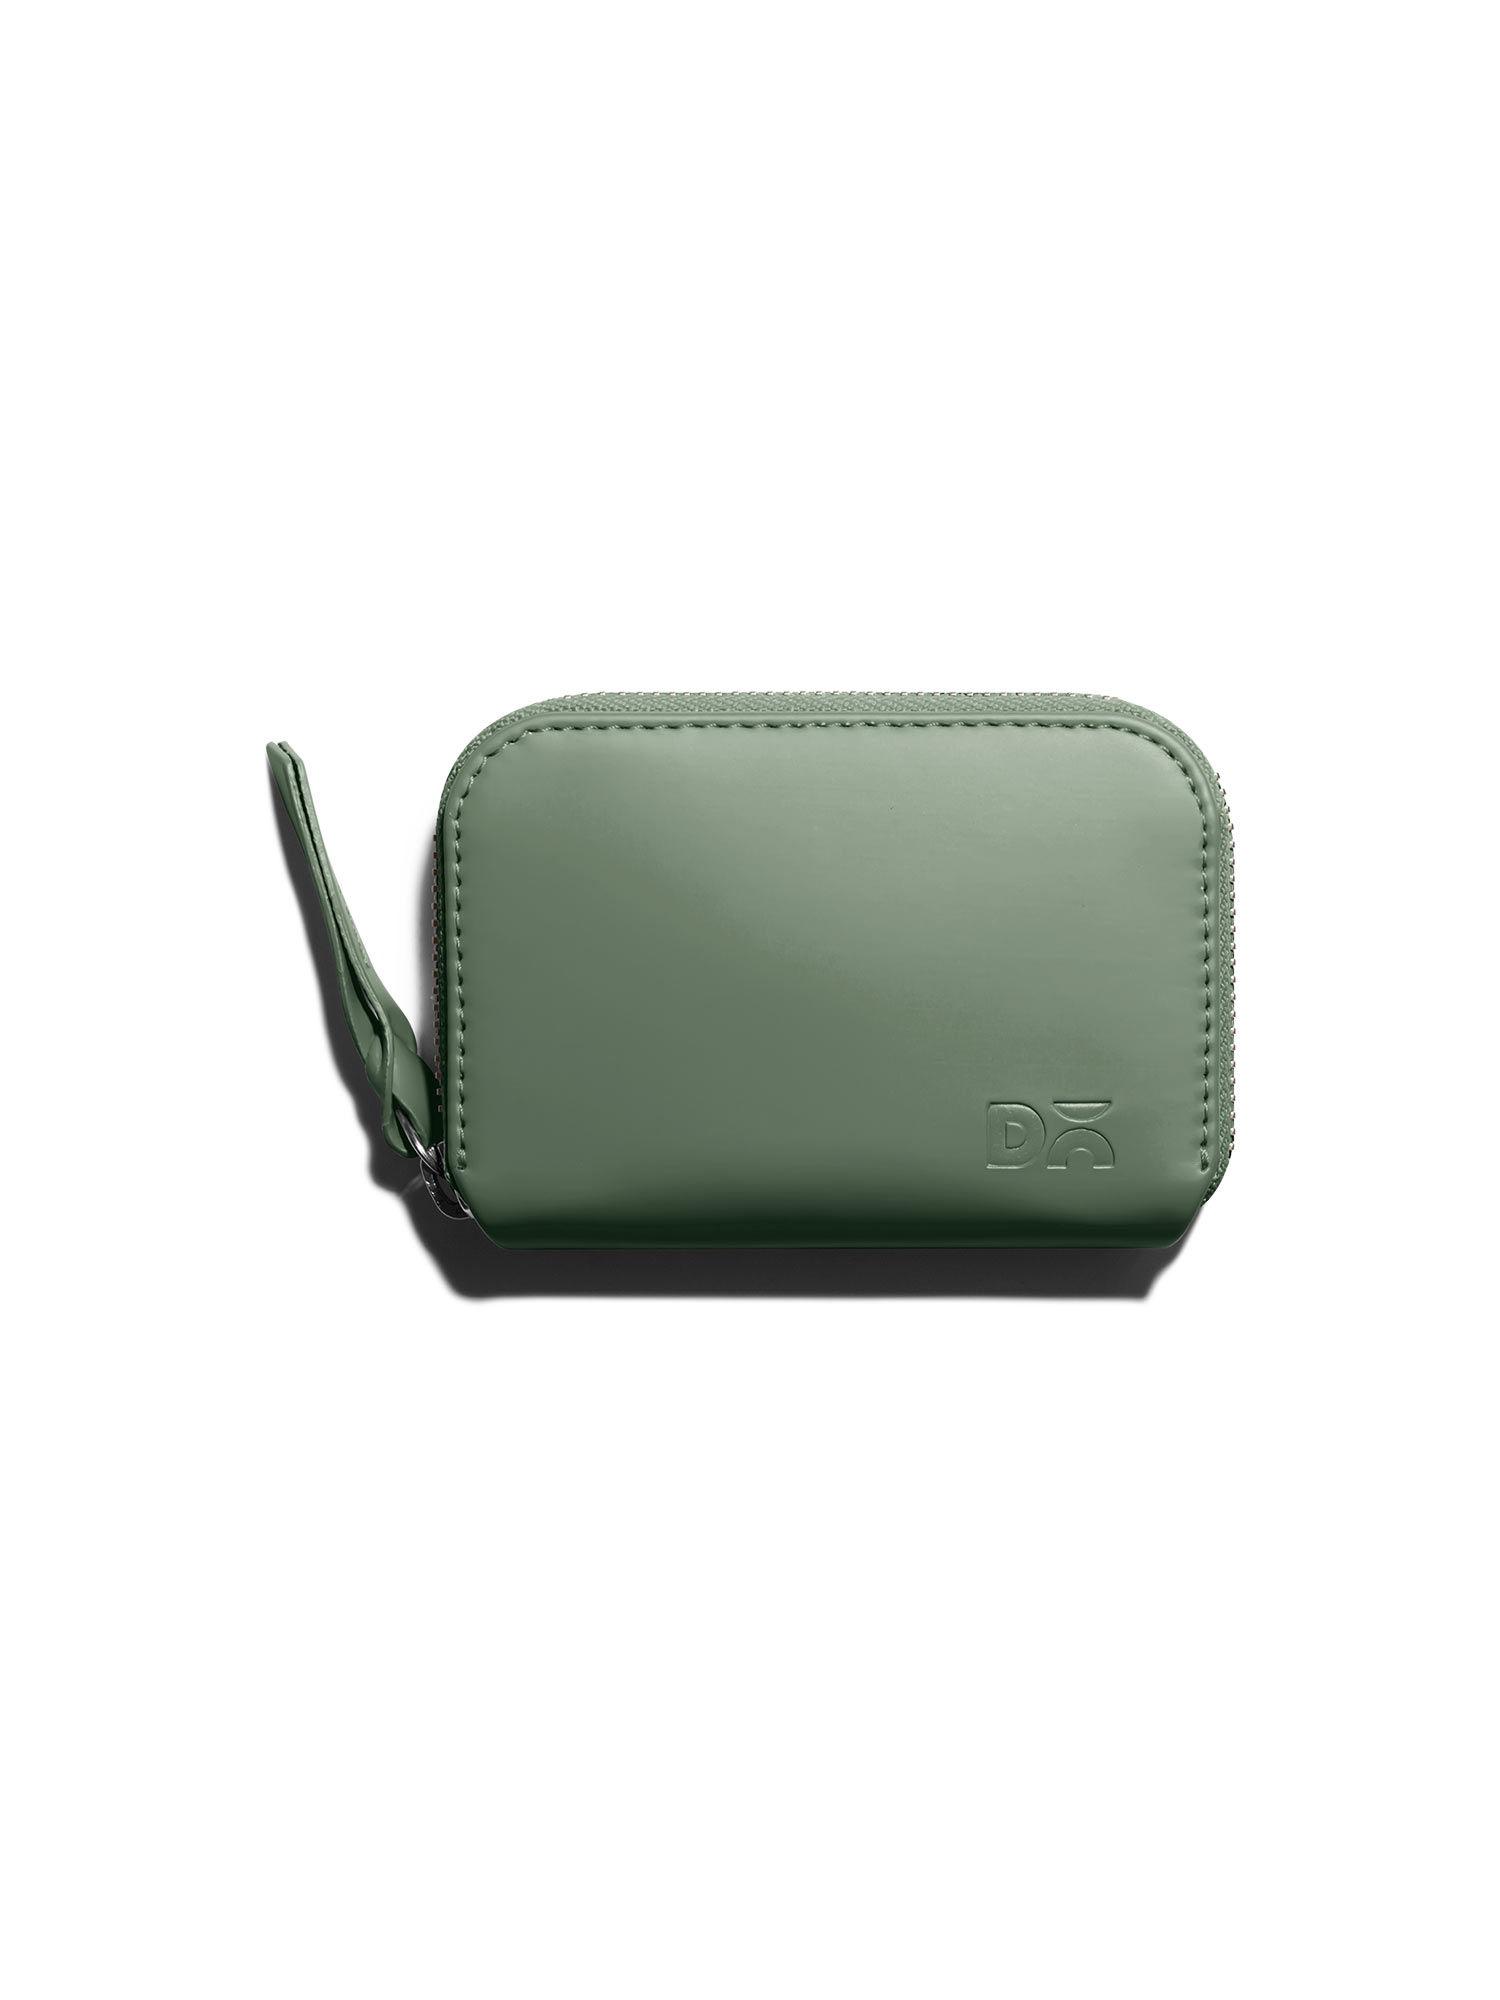 sap green vegan leather zipper slim card and coin wallet